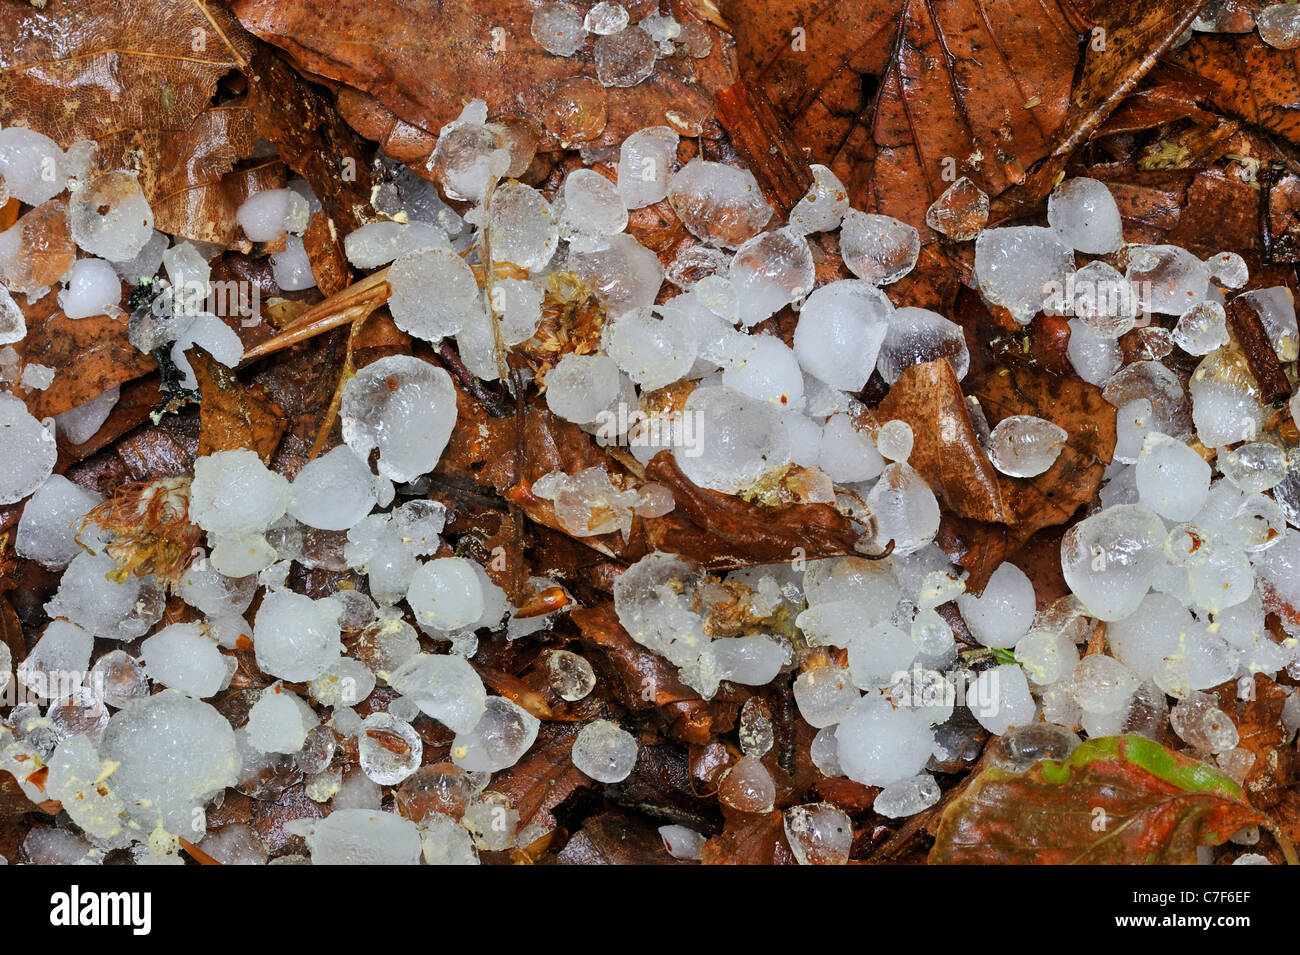 Hailstones on leaves on the forest floor after hailstorm Stock Photo